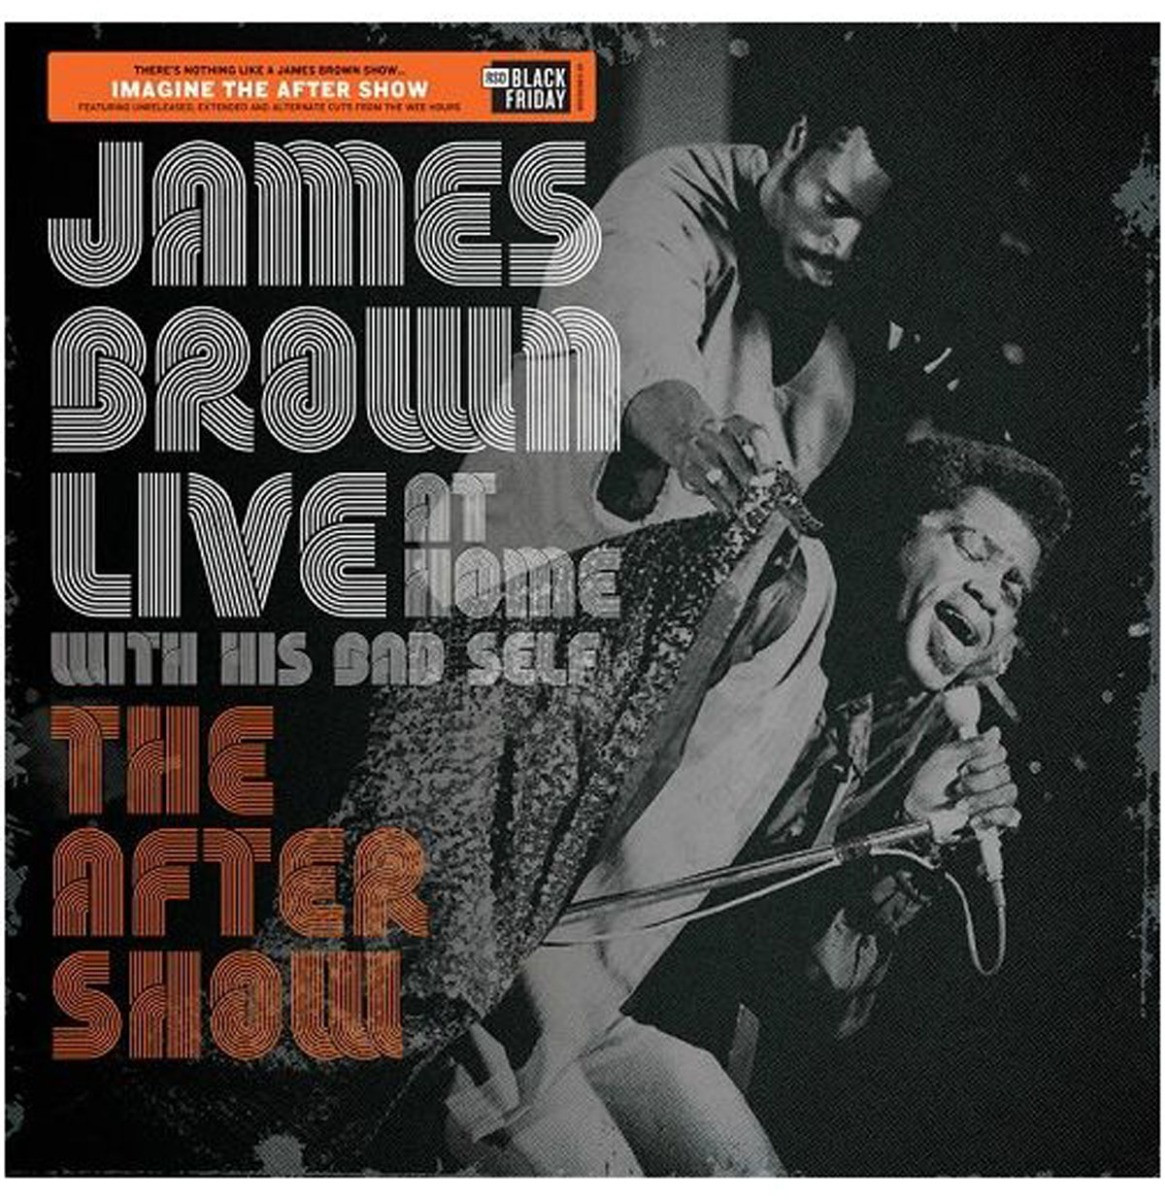 James Brown - Live At Home With His Bad Self (The After Show) LP